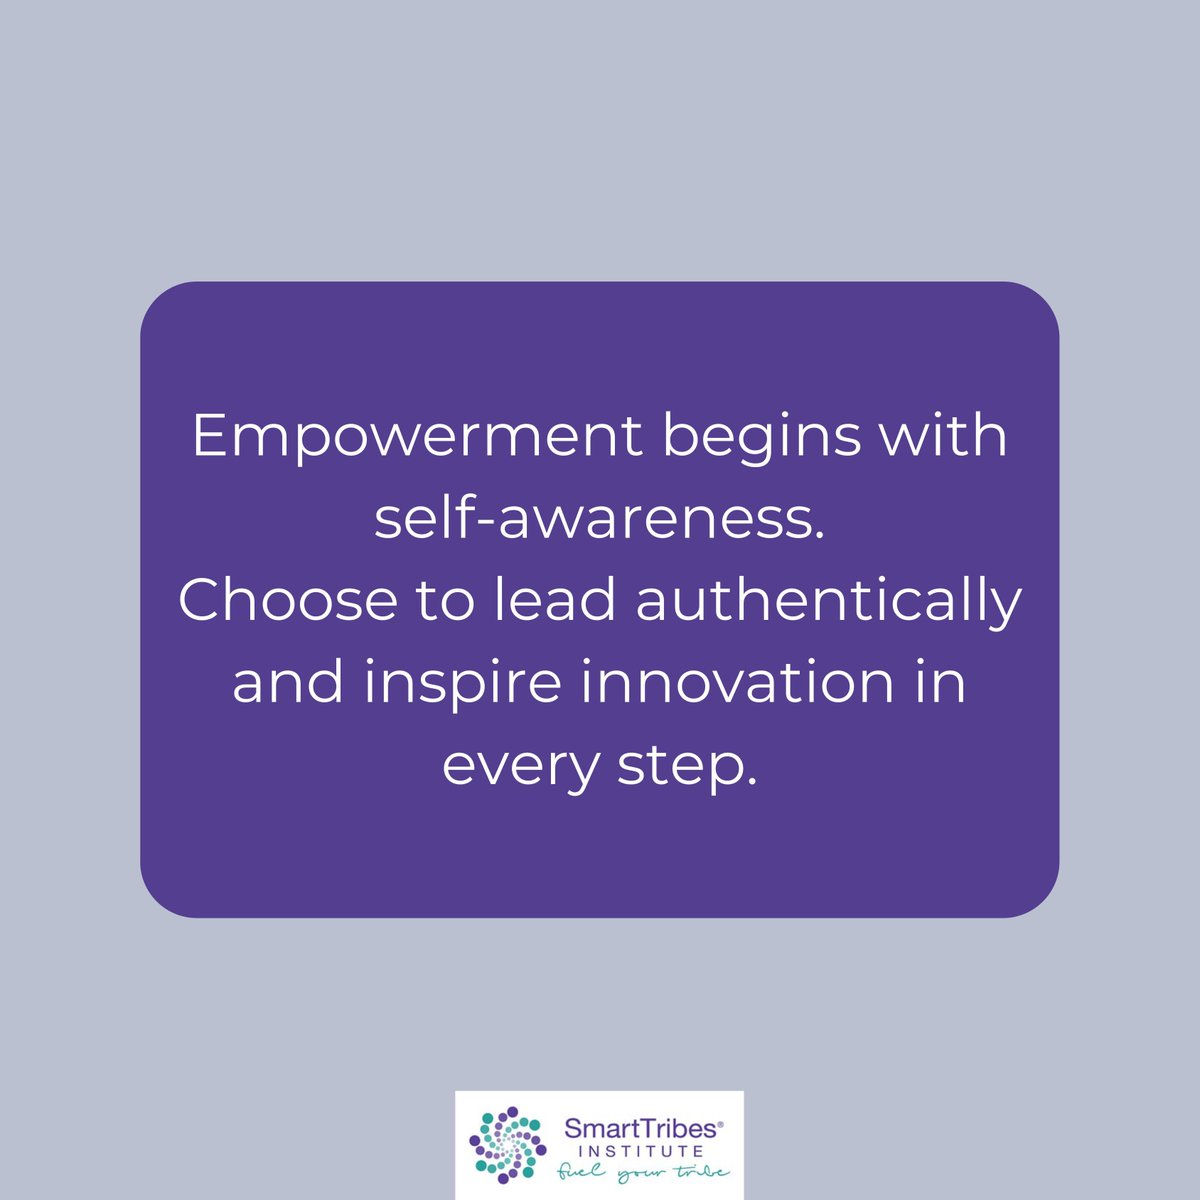 In a world of constant change, true influence stems from understanding and collaboration. Empower yourself to lead with empathy and flexibility. Dive into our blog for insights on choosing yourself to lead with impact. Here is the link buff.ly/43QVOIl #ChooseYourself